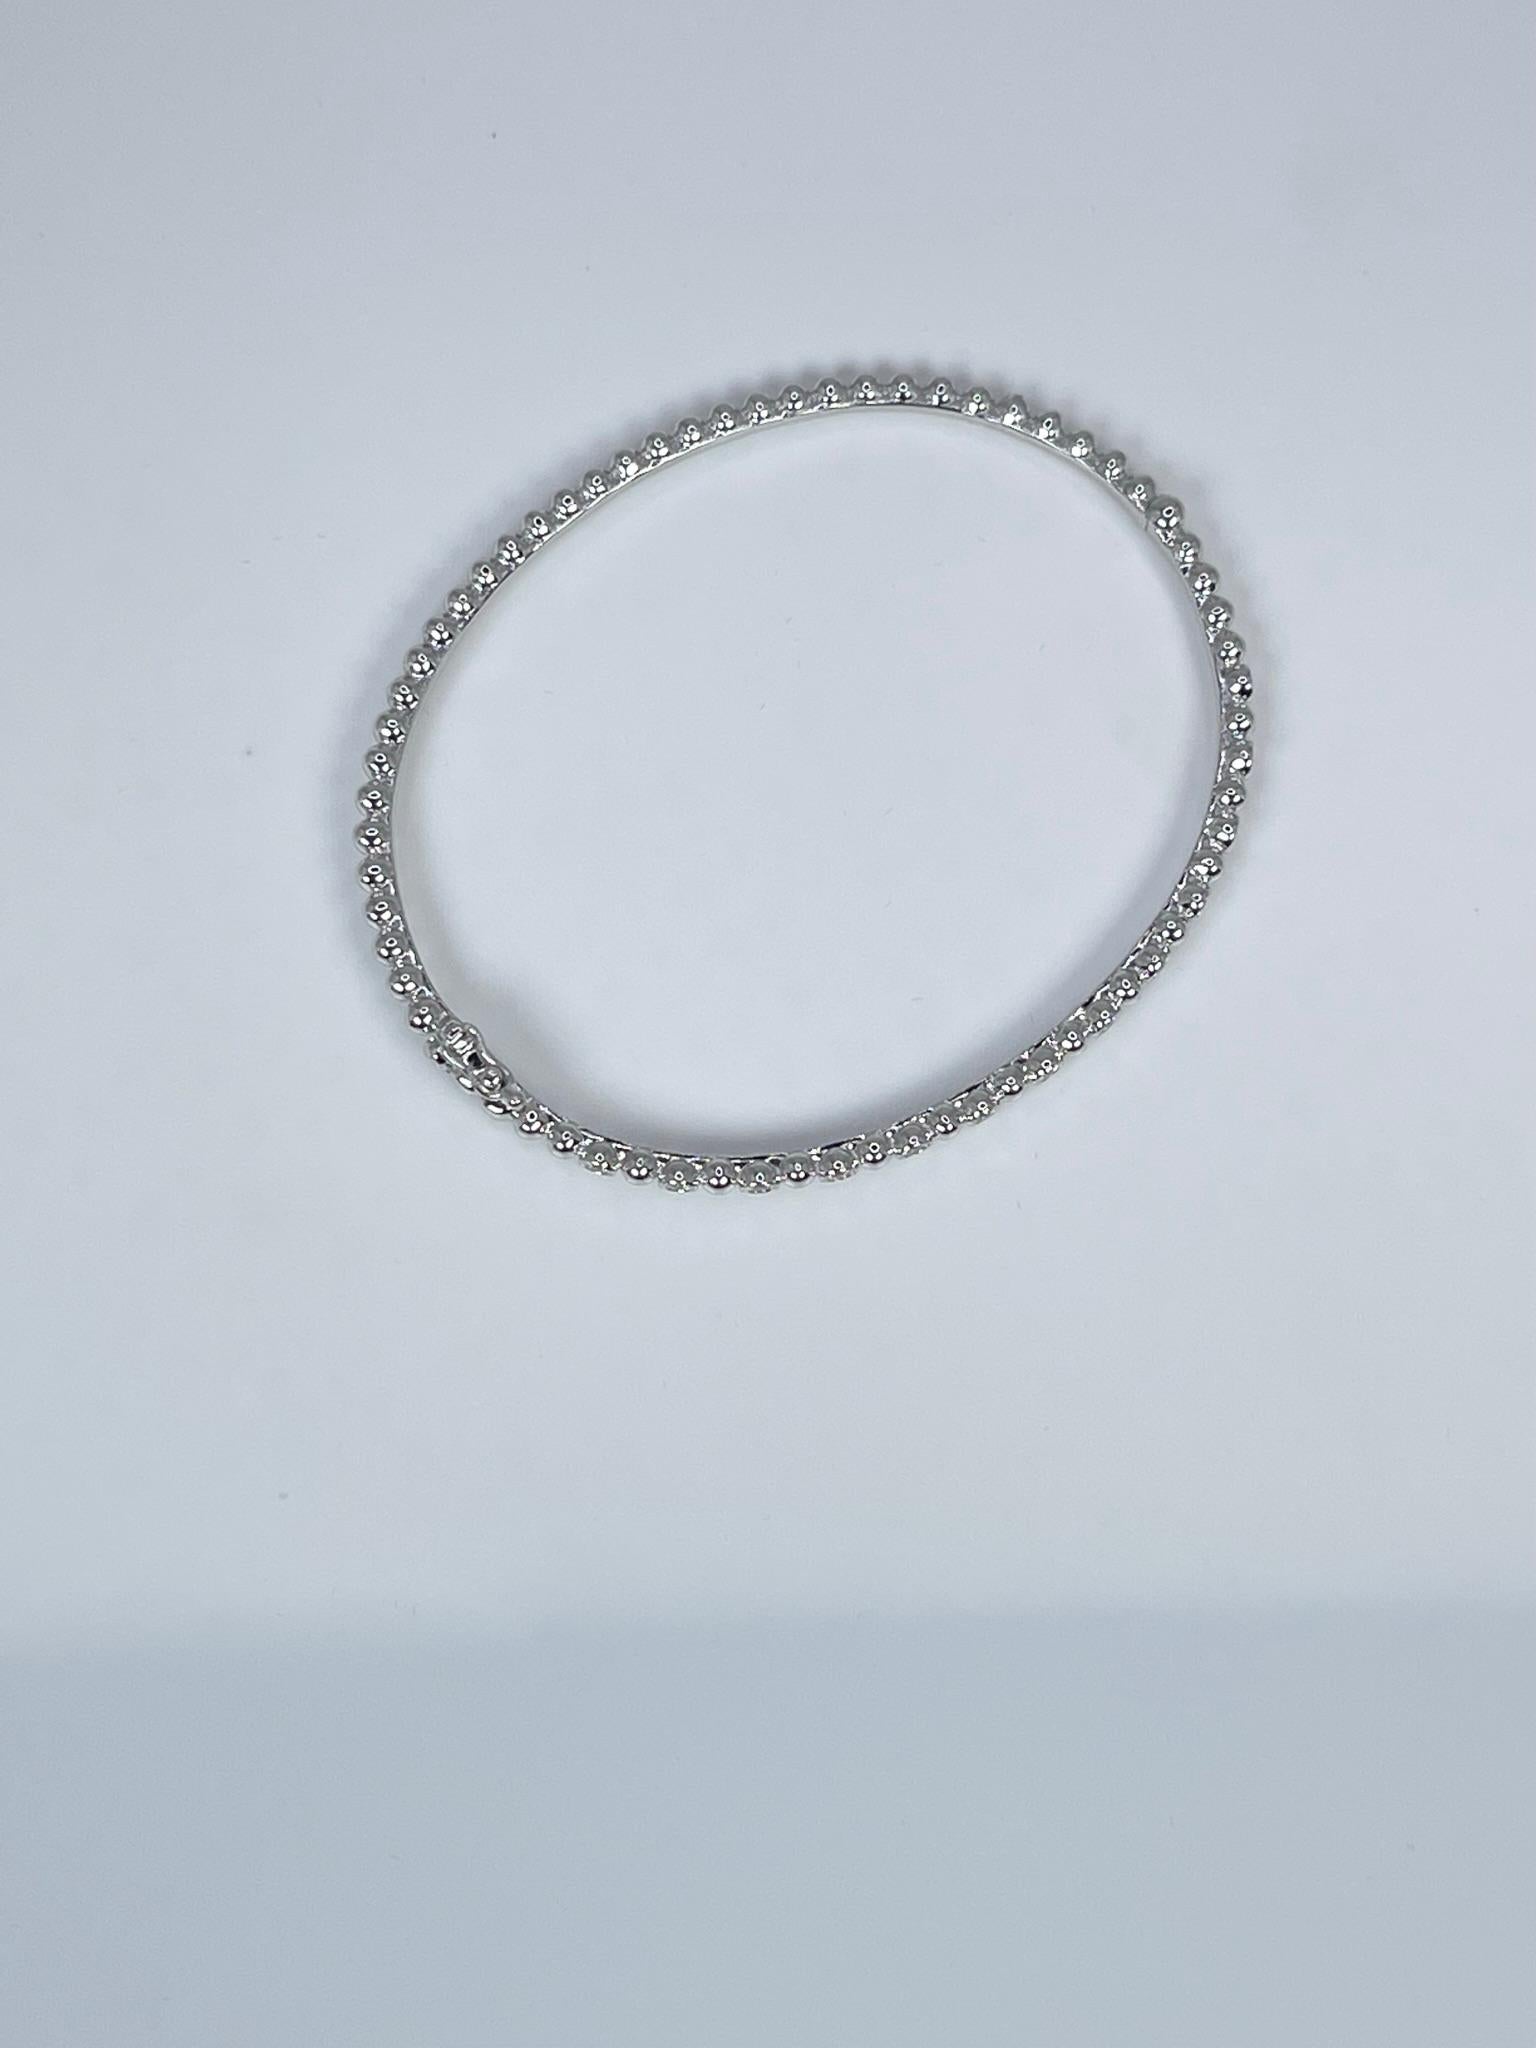 Unique Diamond Bead Bangle Bracelet in 14KT white gold.

GRAM WEIGHT: 9.60gr
GOLD: 14KT white gold

NATURAL DIAMOND(S)
Cut: Round Brilliant
Color: F (average)
Clarity: VS (averge)
Carat: 0.38ct
Diameter:66mm x 53mm 

WHAT YOU GET AT STAMPAR